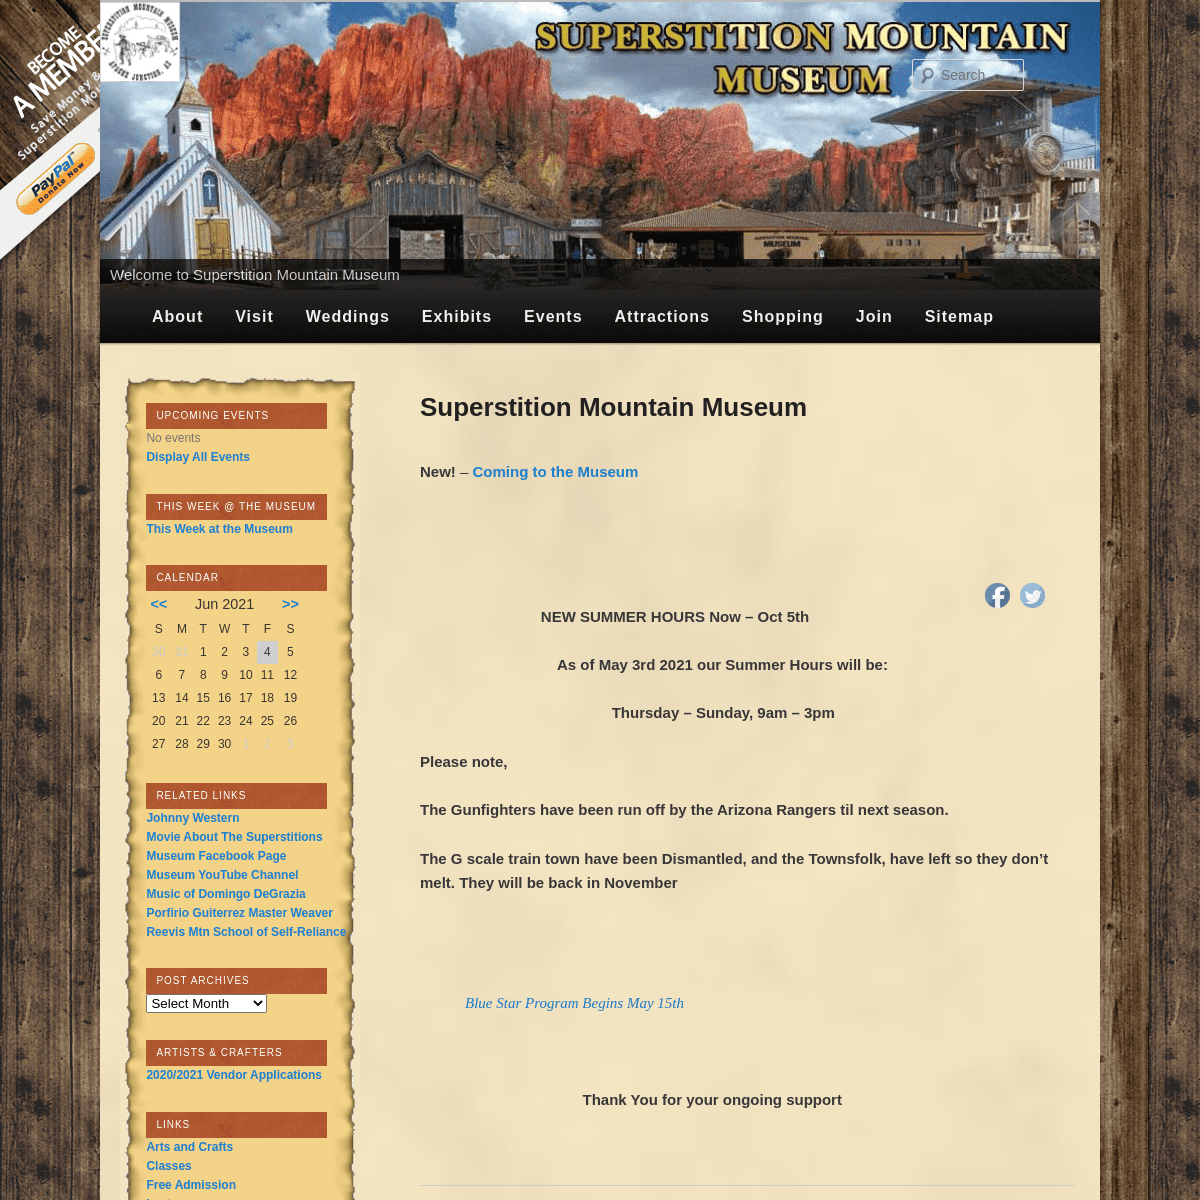 A complete backup of https://superstitionmountainmuseum.org